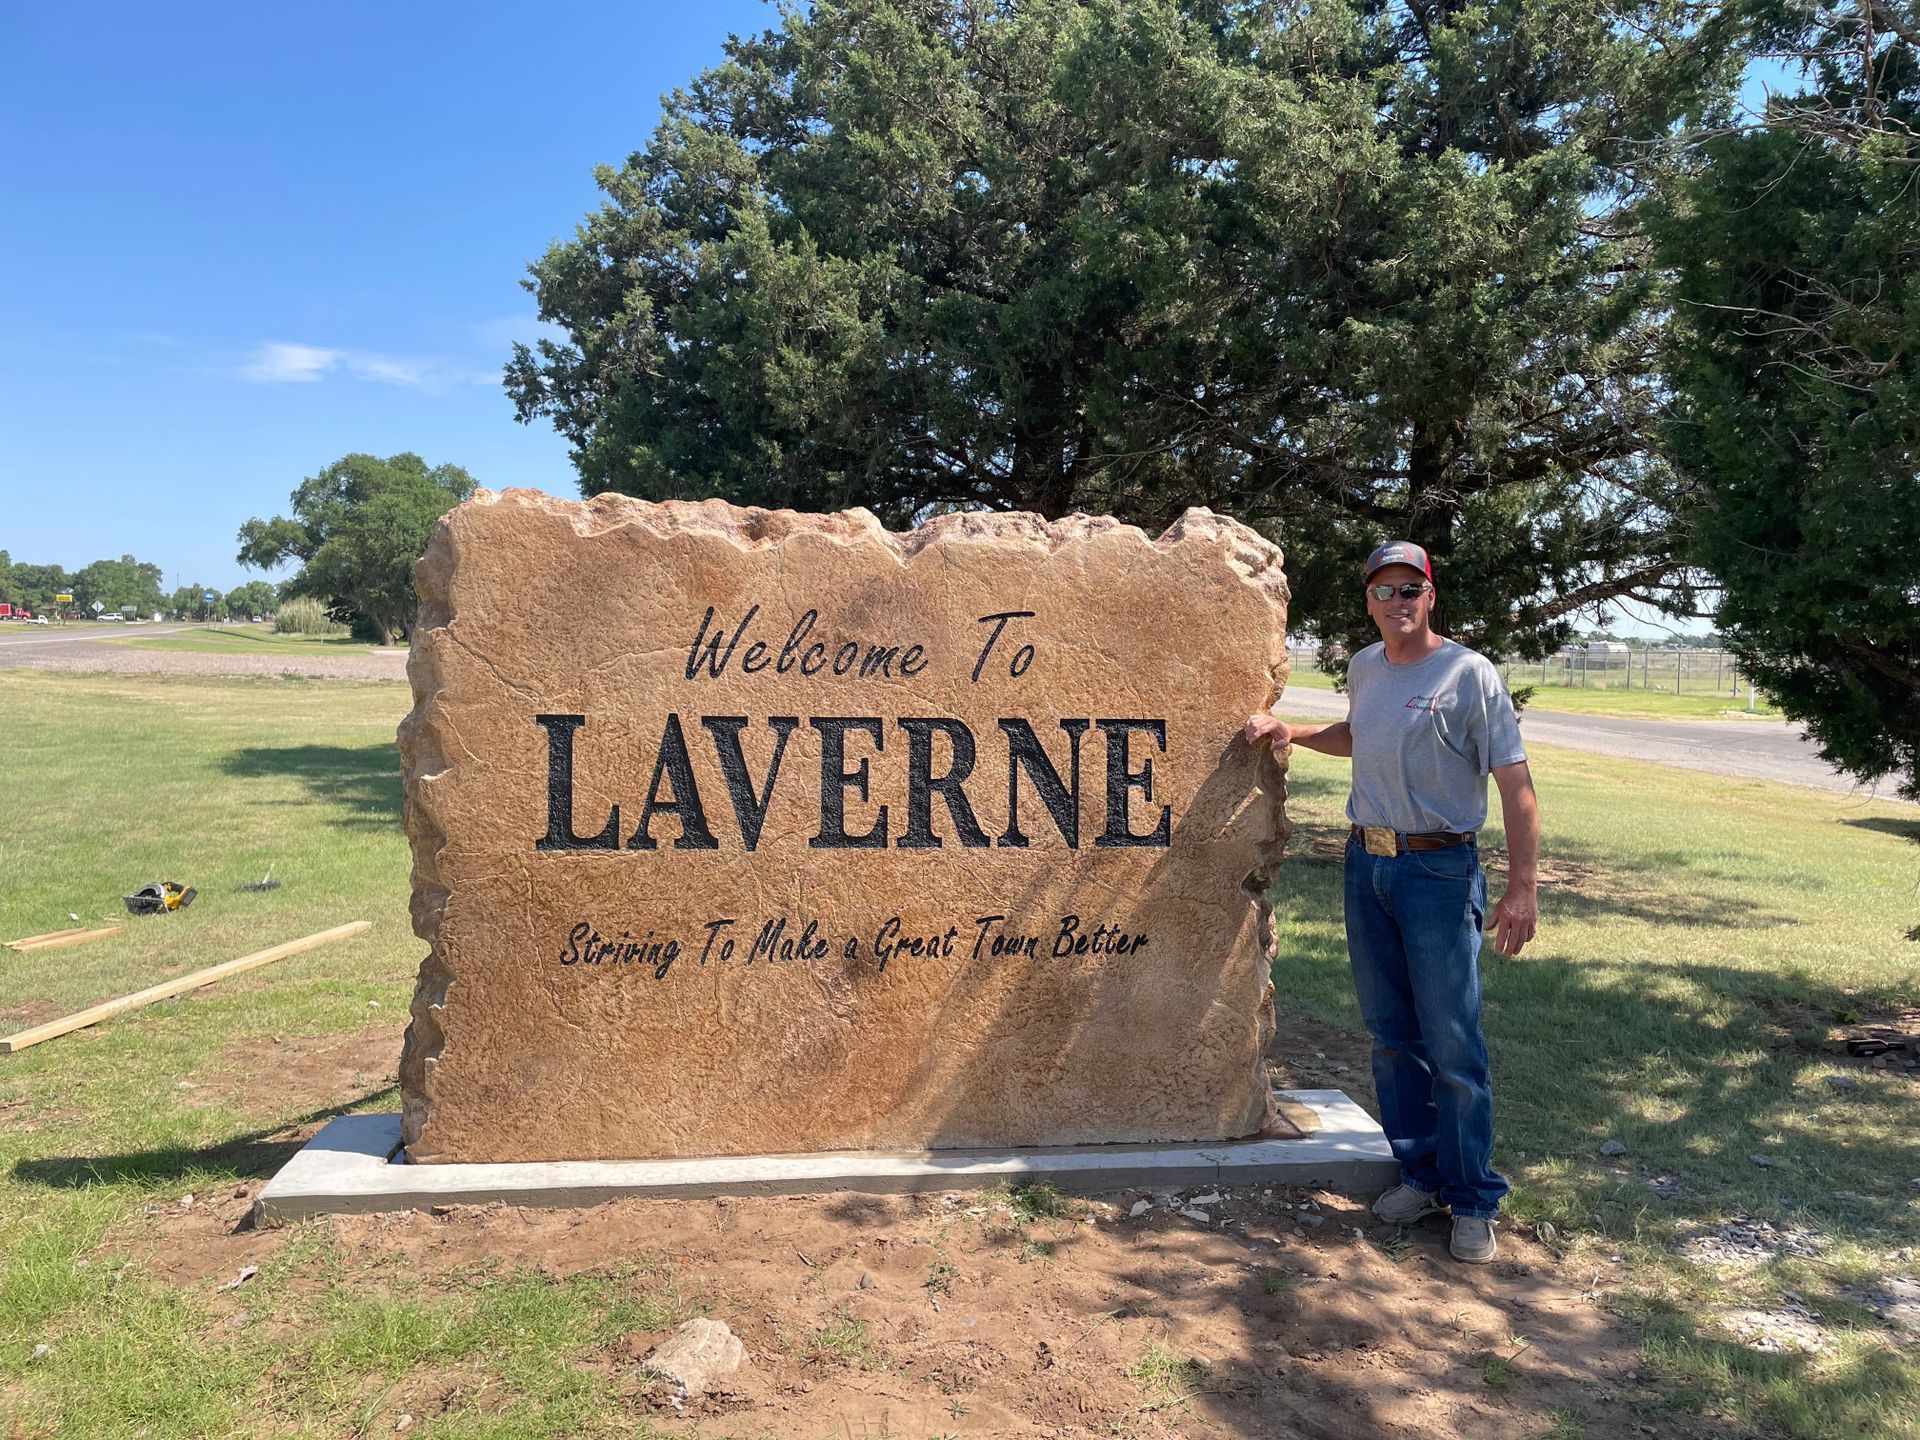 A man is standing in front of a large stone sign that says welcome to laverne.